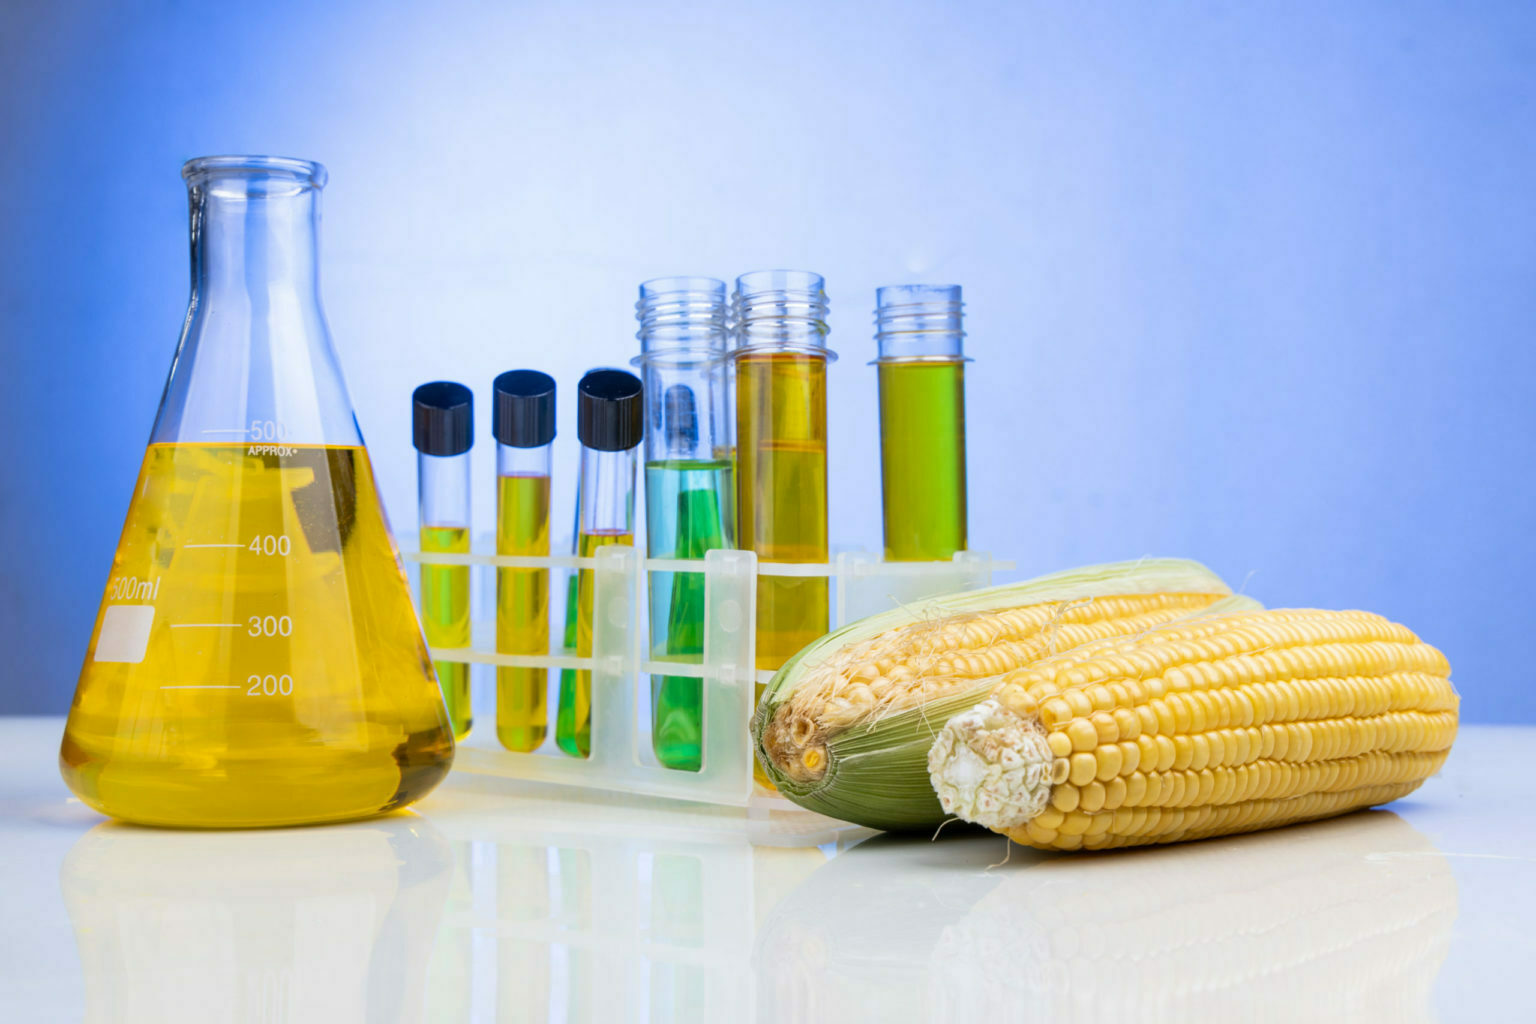 Ethanol biofuel derived from corn maze with beaker test tubes in laboratory